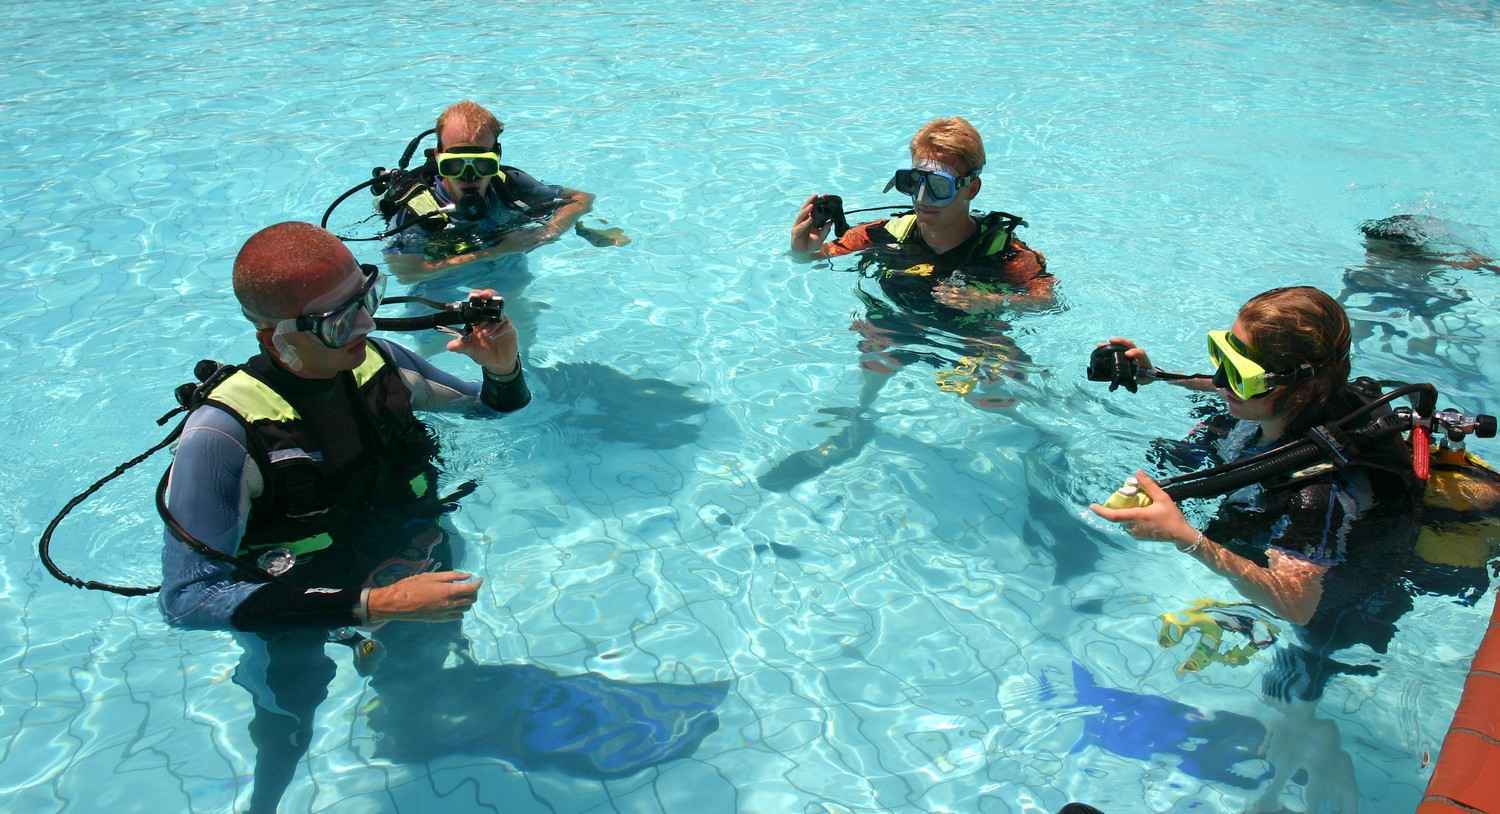 A scuba diving instructor working with three students in a swimming pool.